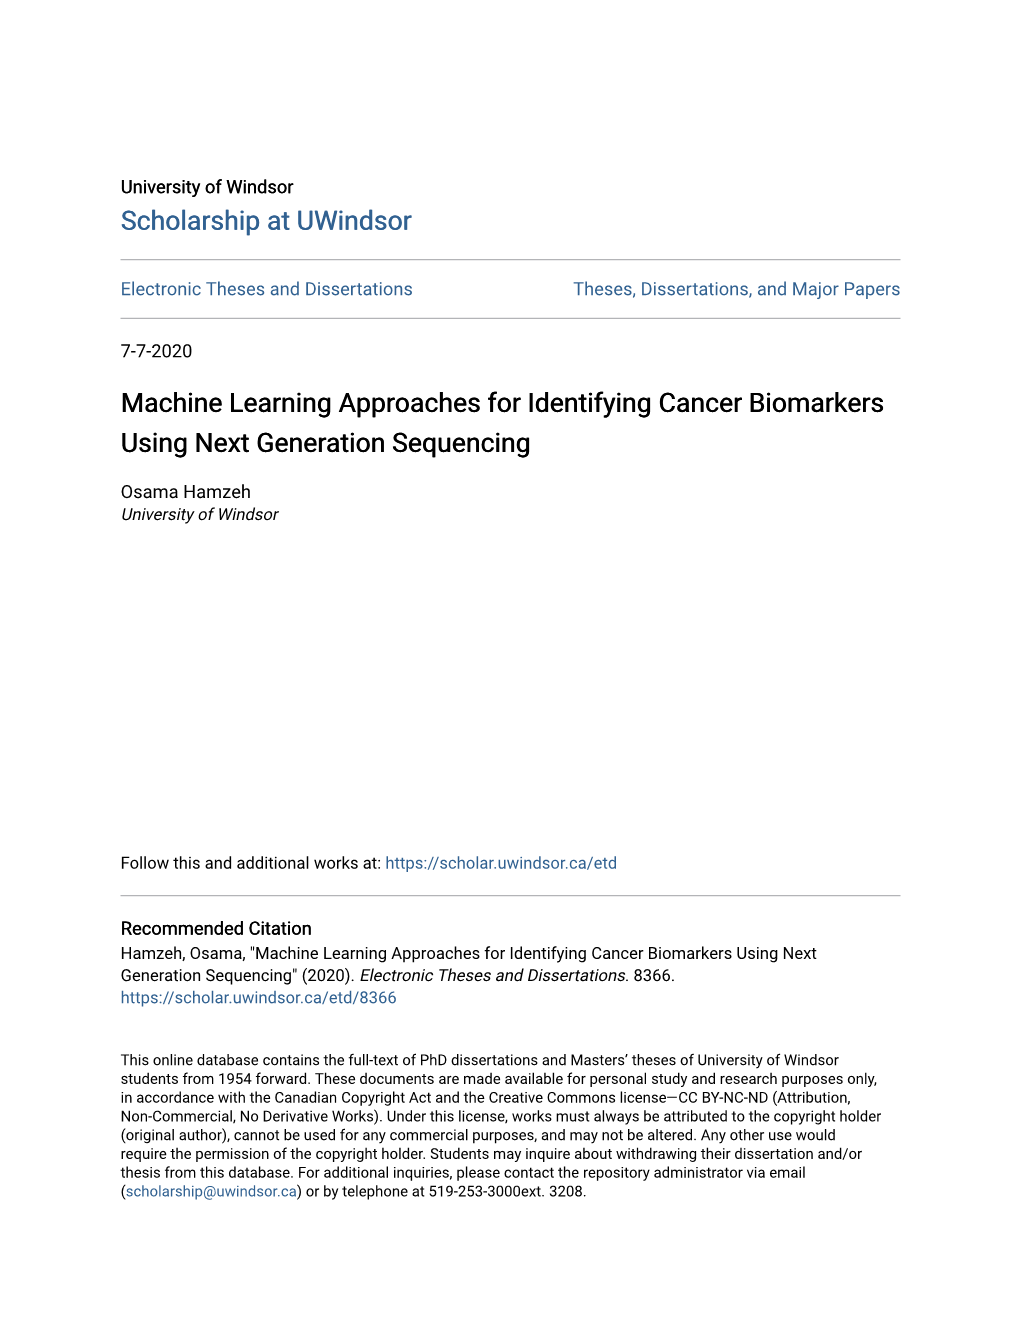 Machine Learning Approaches for Identifying Cancer Biomarkers Using Next Generation Sequencing